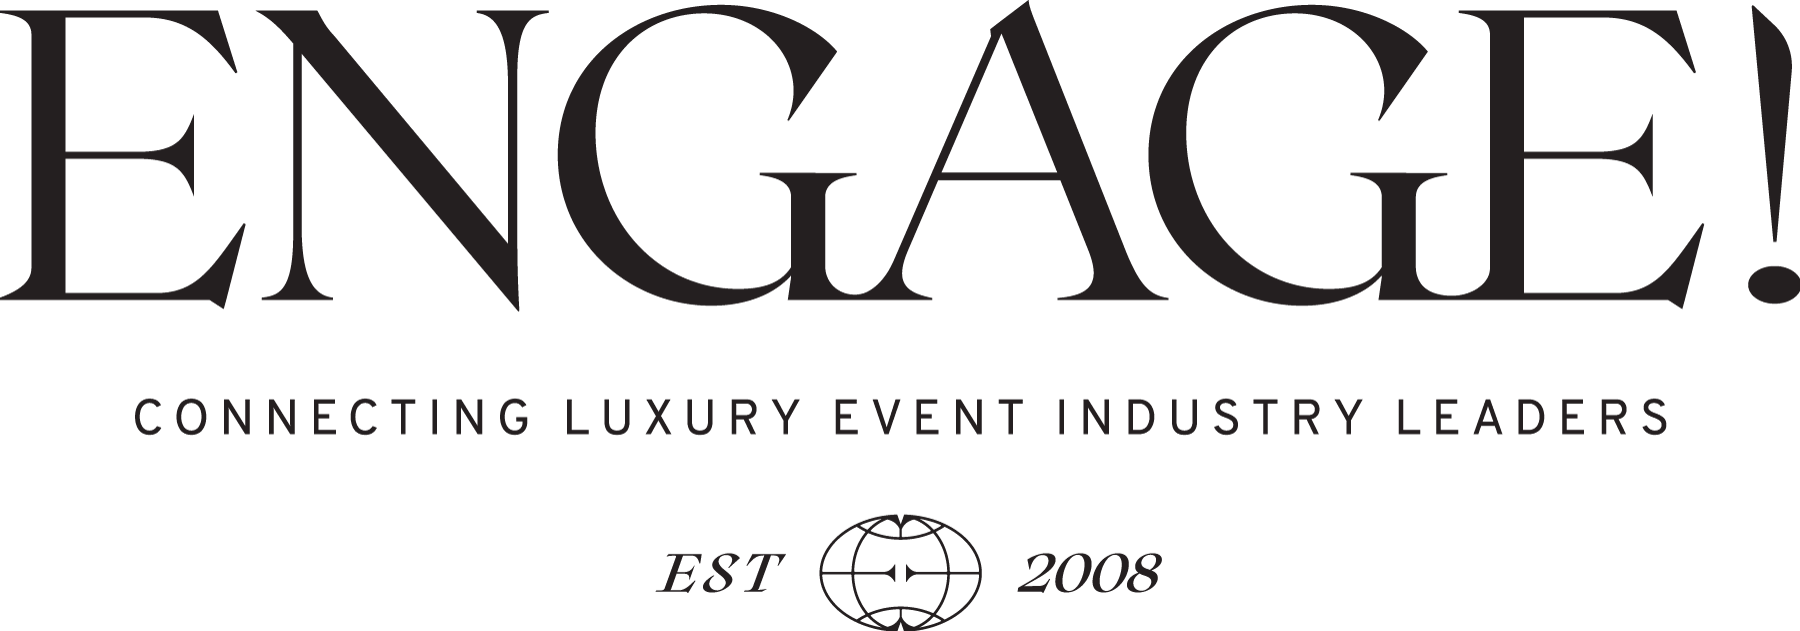 Engage! Connecting luxury event industry leaders. Est'd 2008